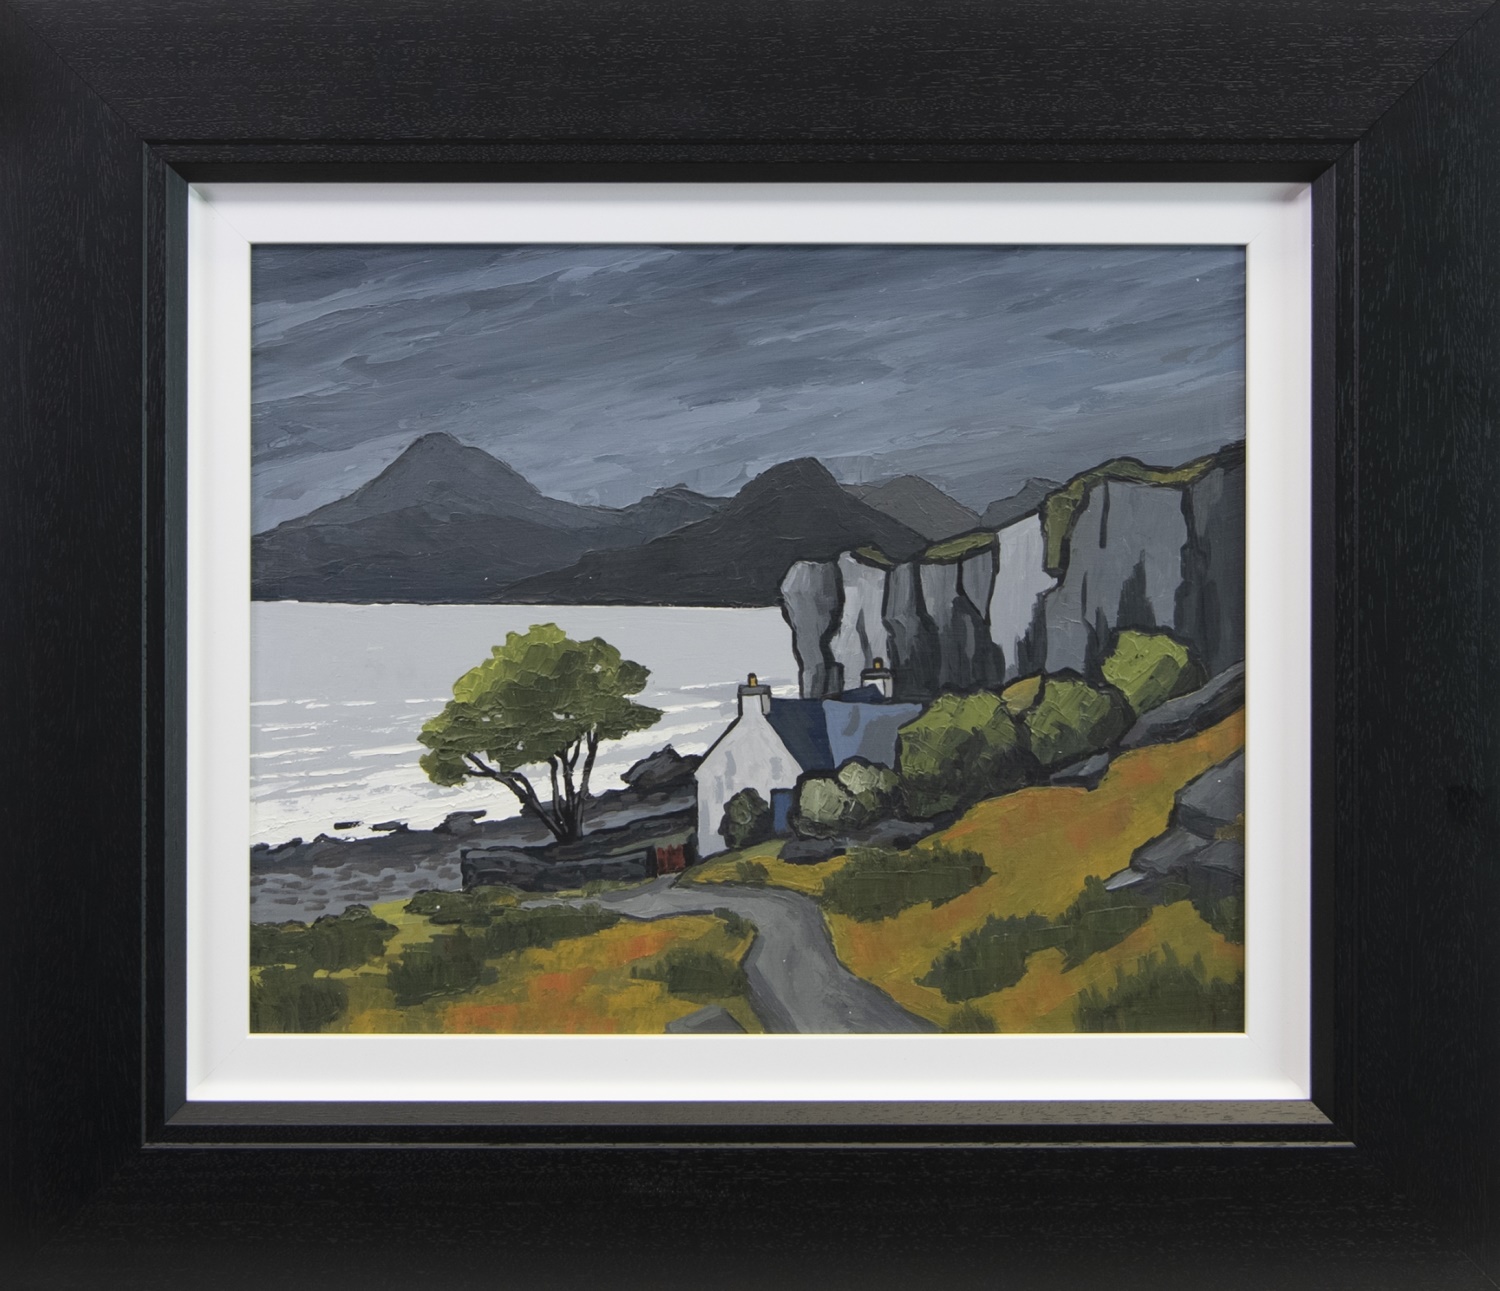 THE CUILLINS FROM ELGOL, AN OIL BY DAVID BARNES